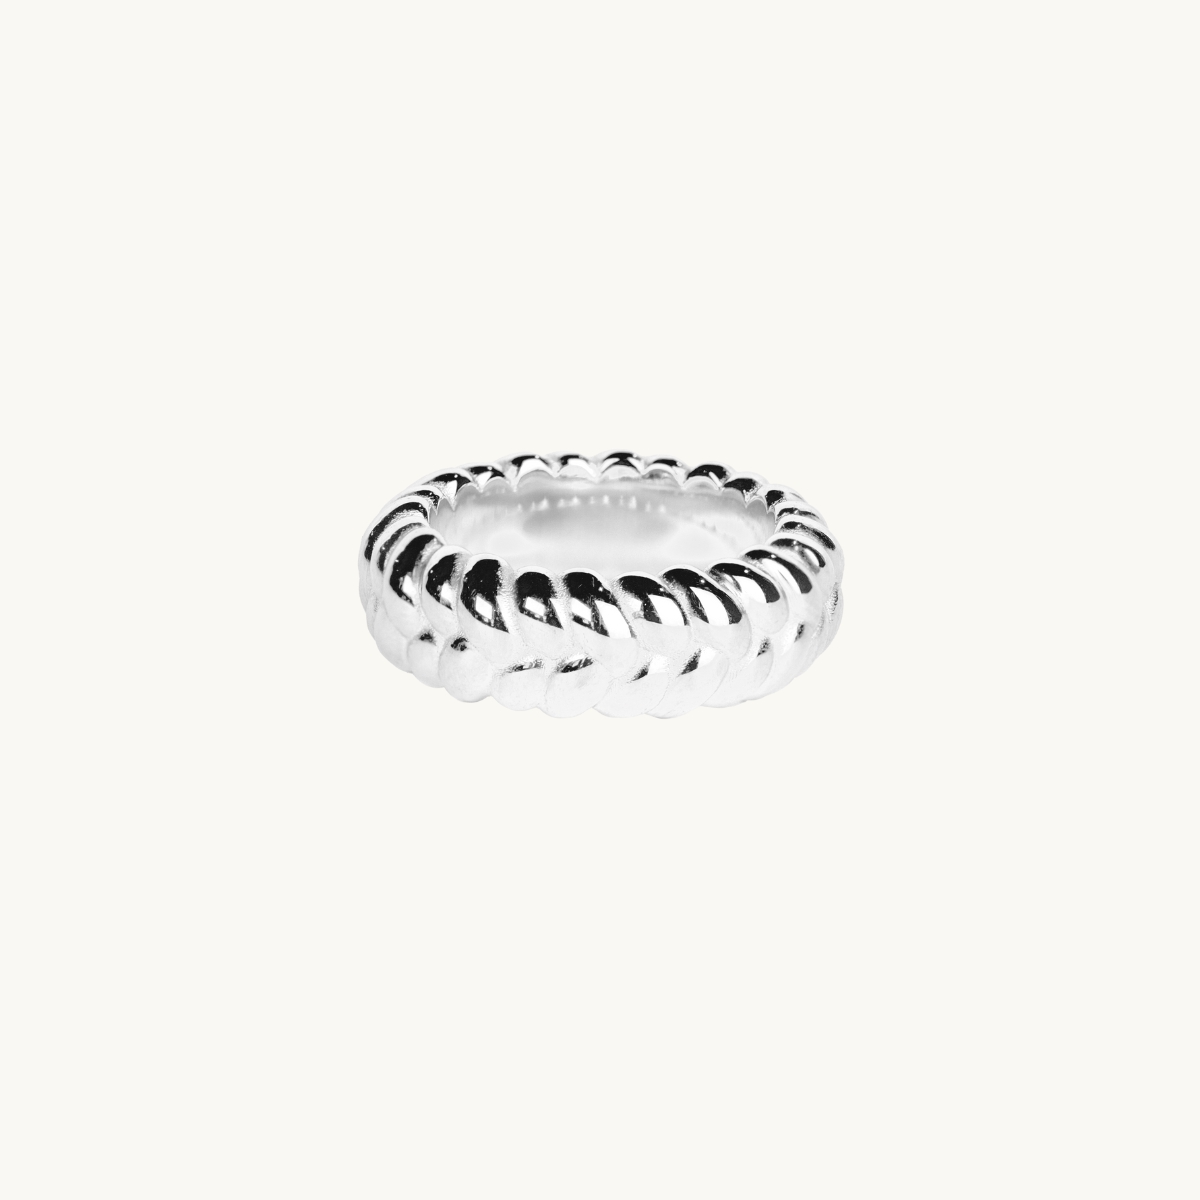 A ring in sterling silver with a braided pattern